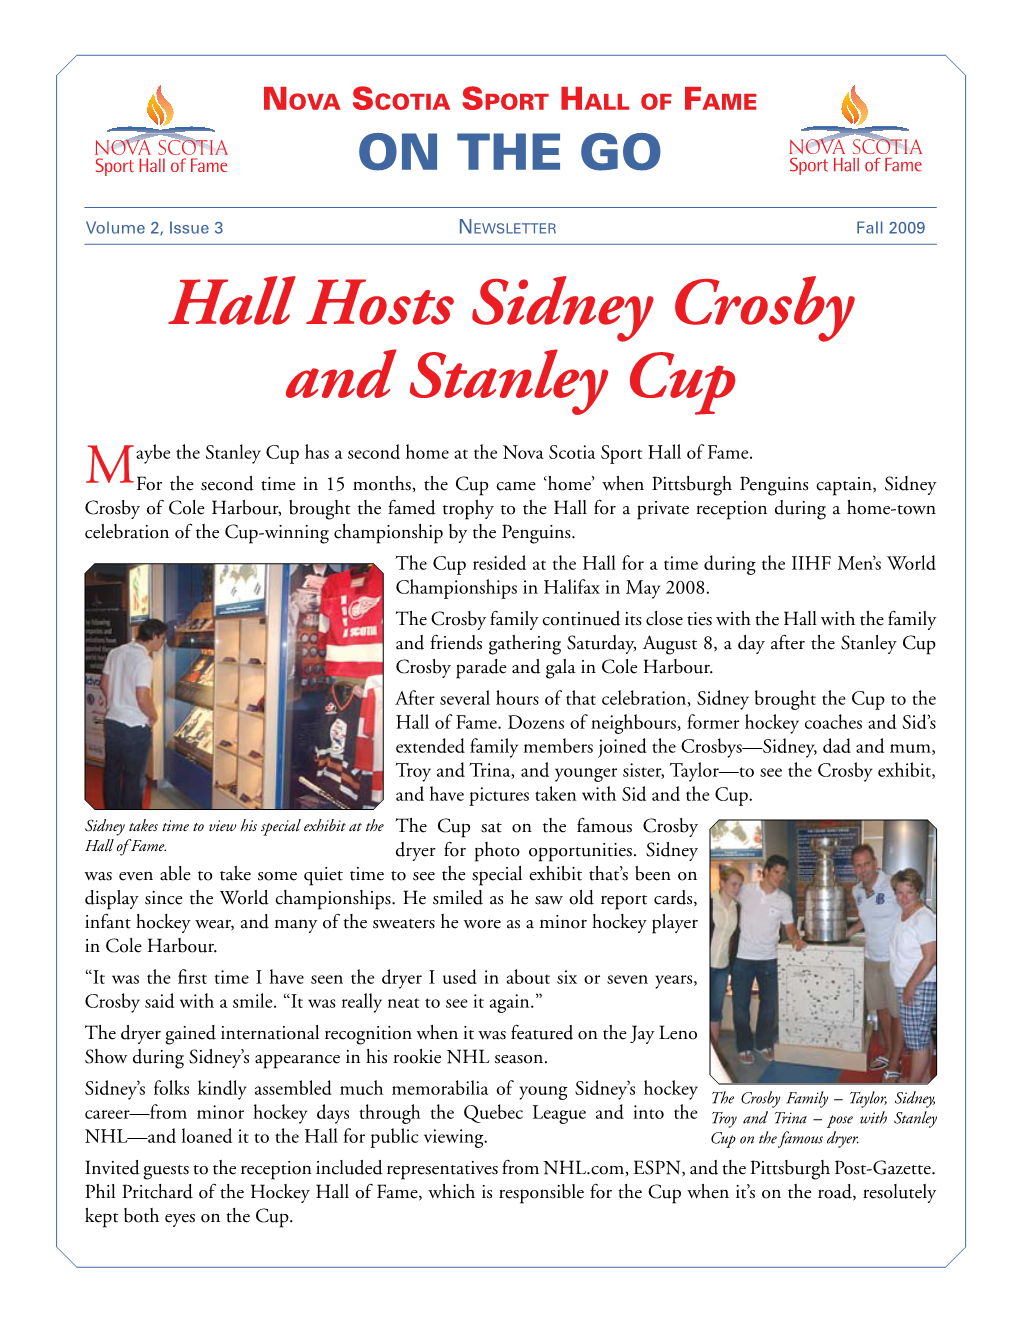 Hall Hosts Sidney Crosby and Stanley Cup